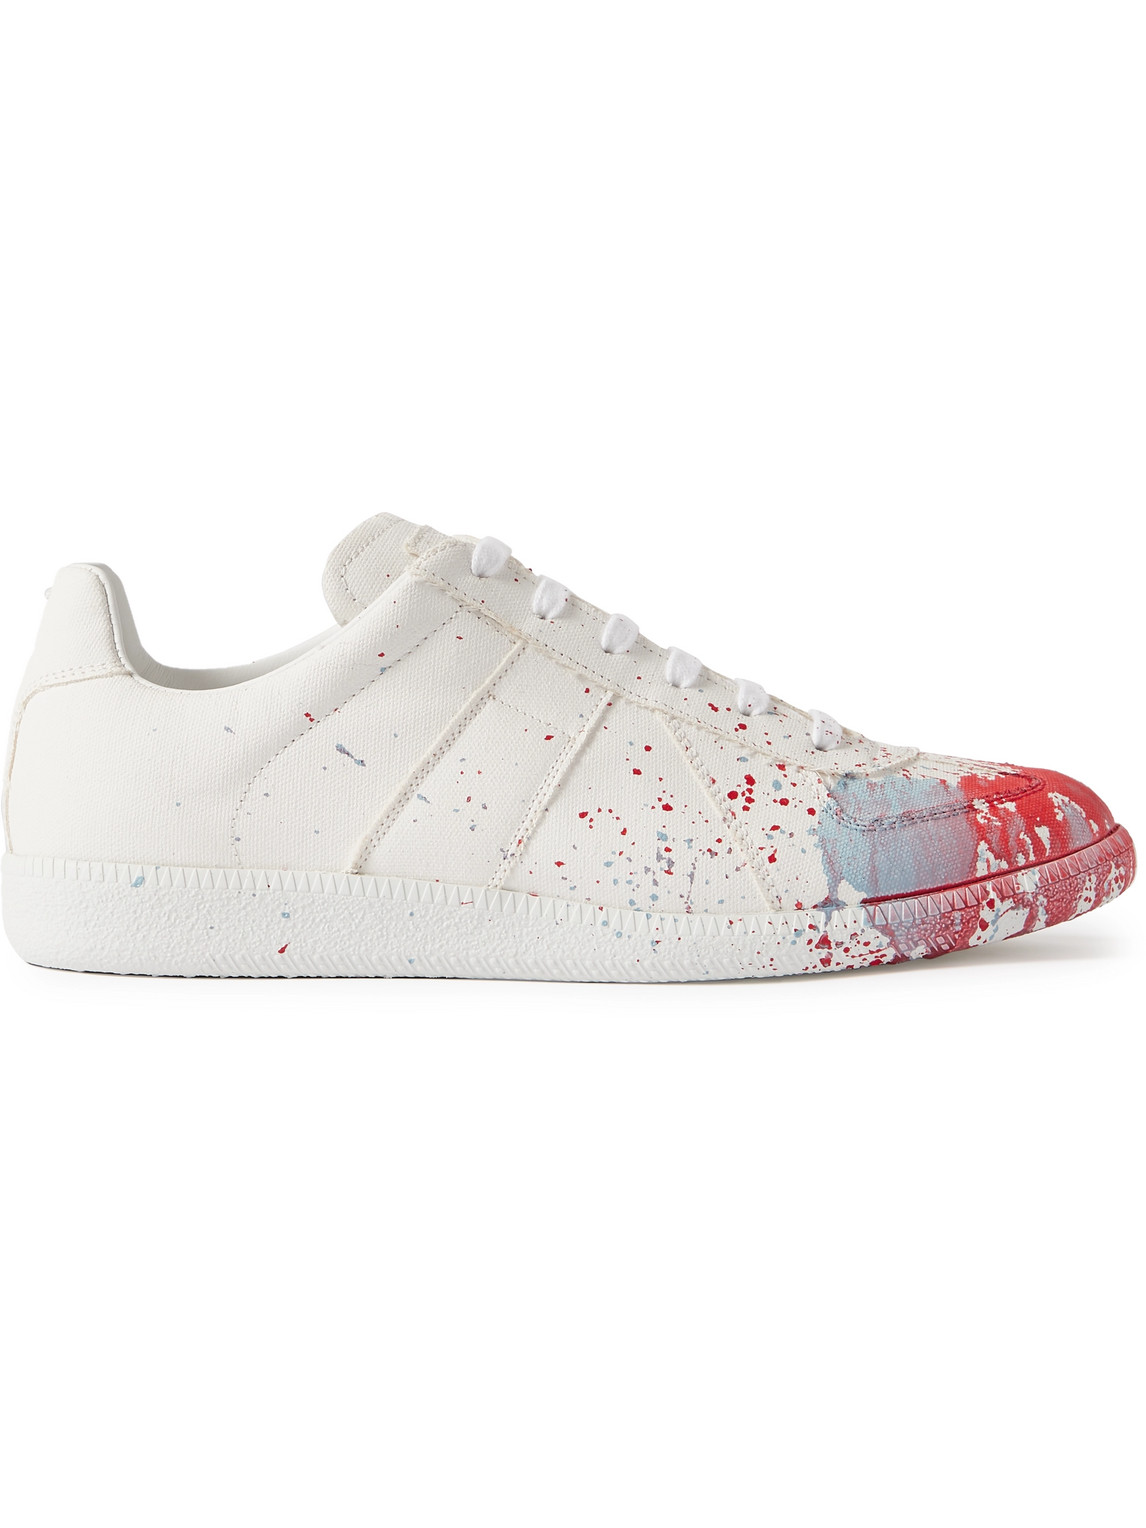 Maison Margiela Replica Painted Canvas Sneakers In White